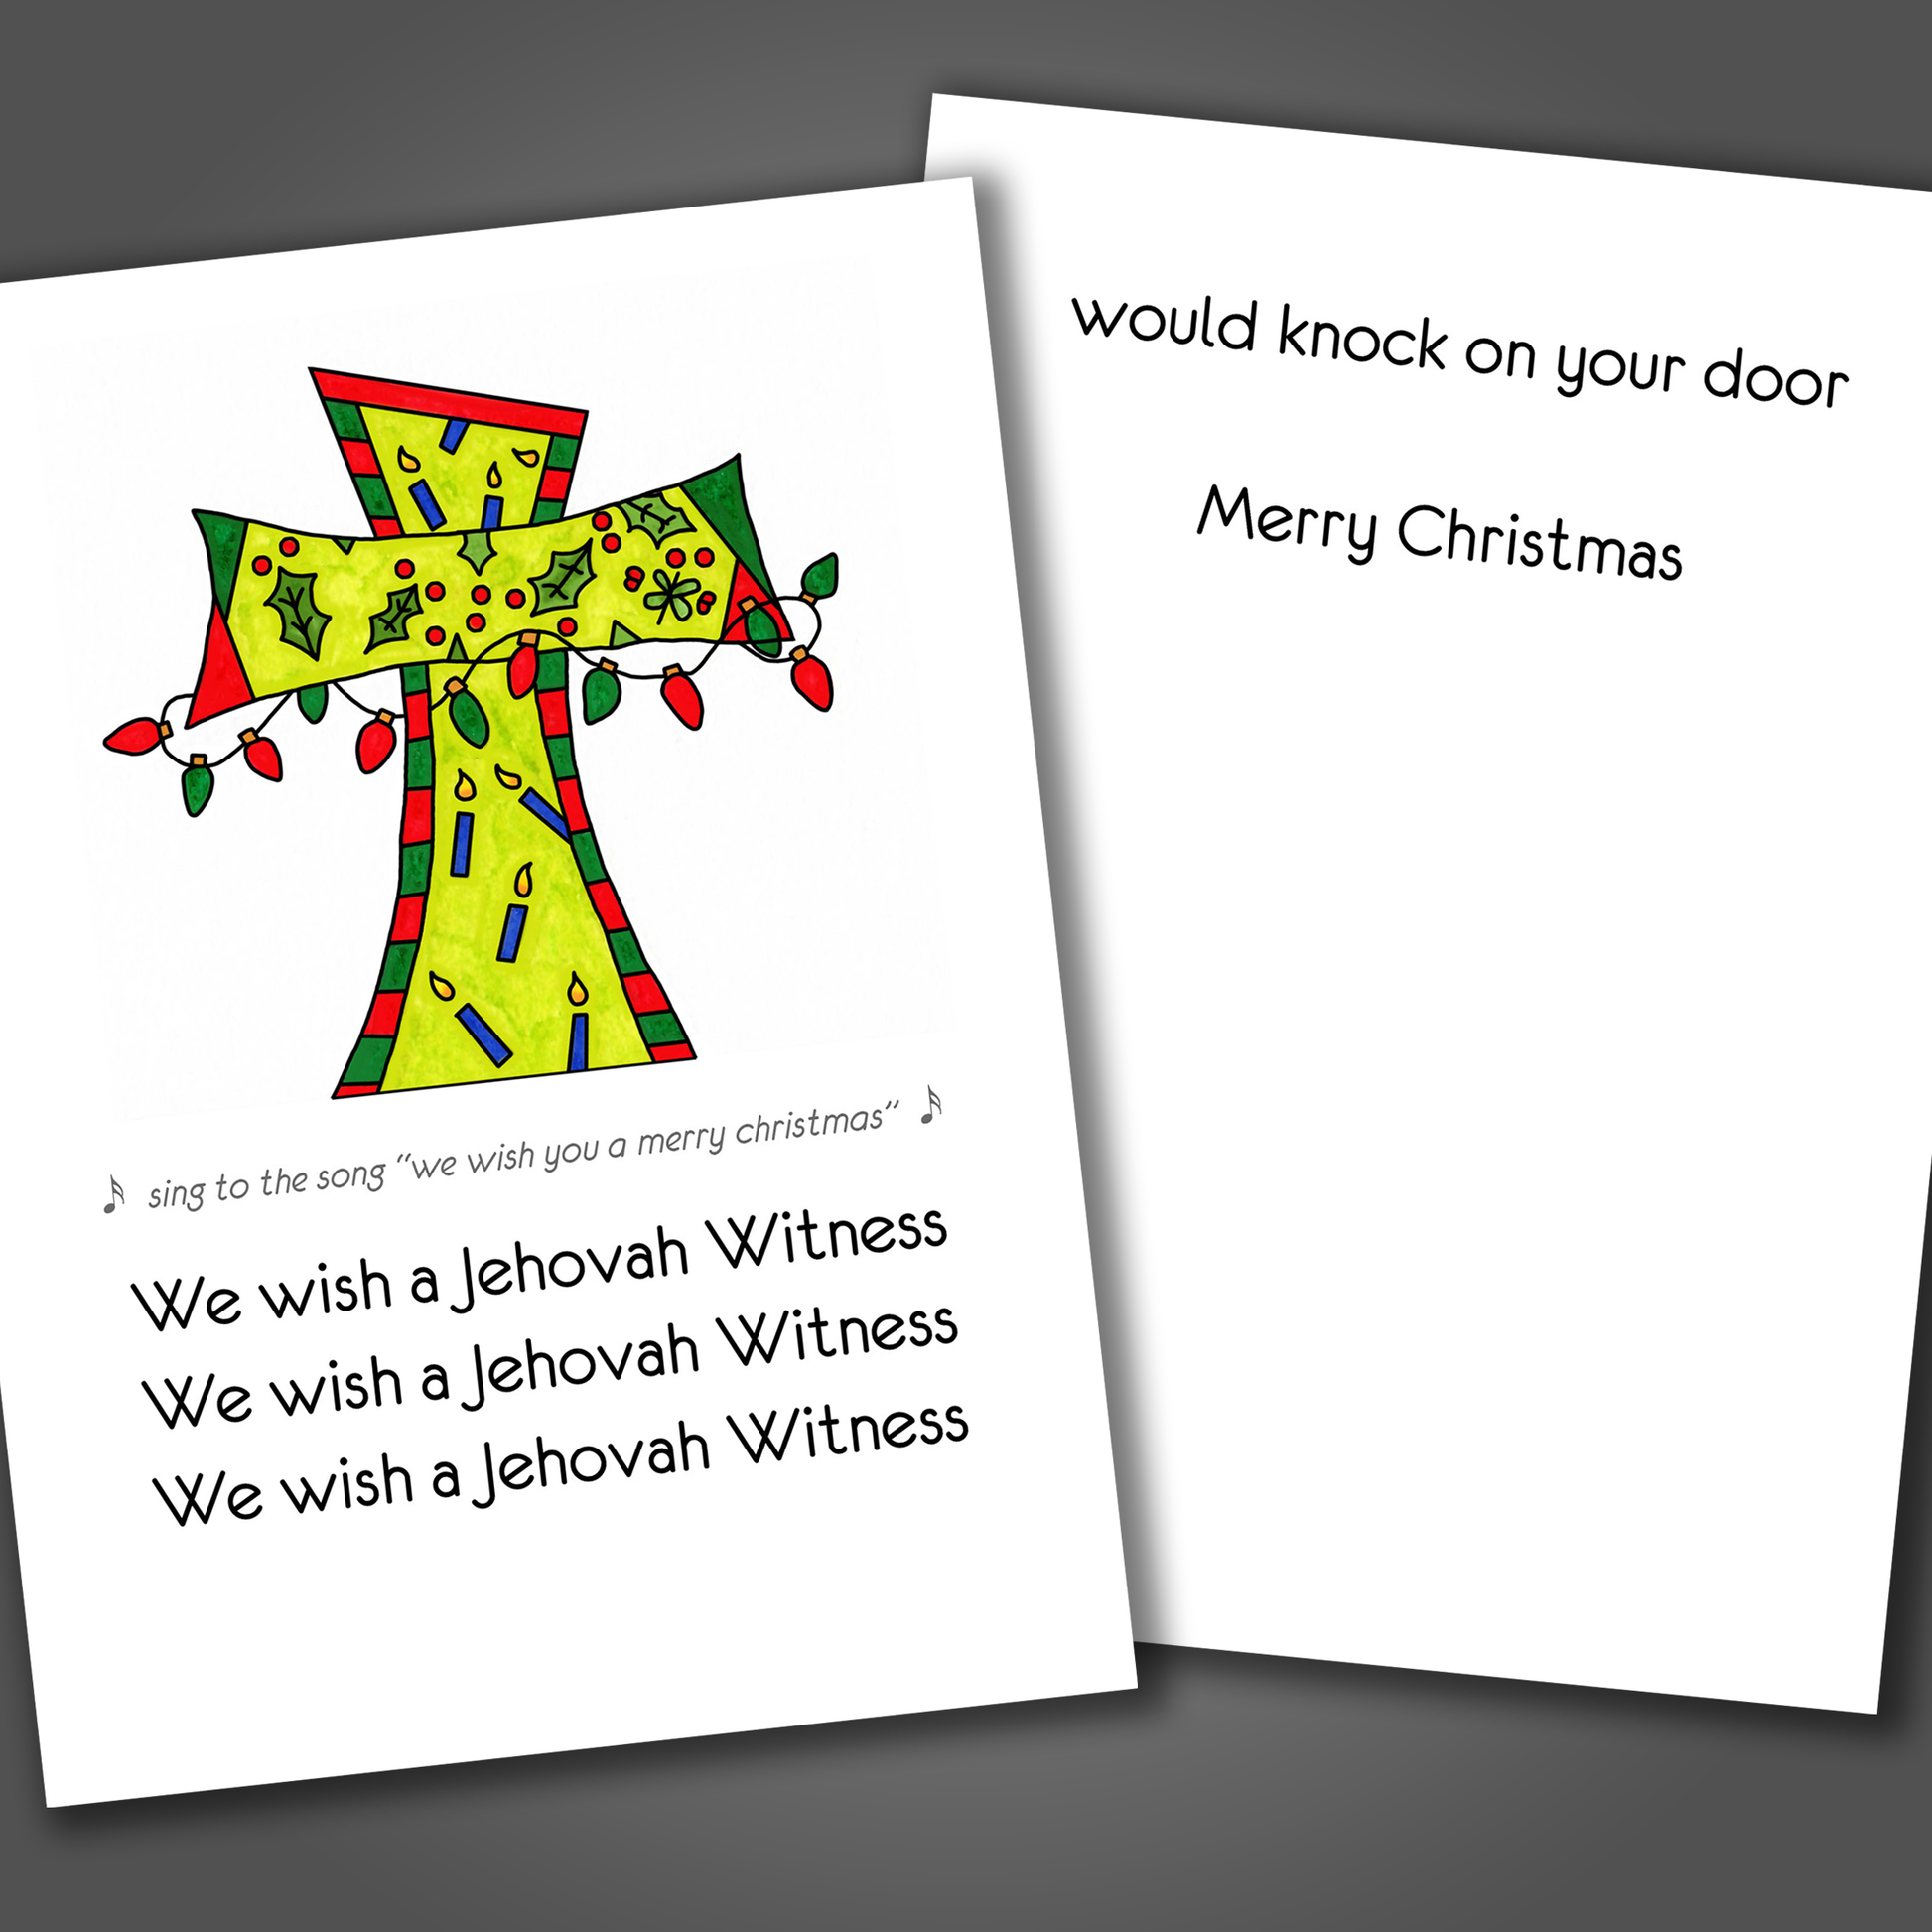 Funny Christmas Card with a Cross on the front of the card. Inside the card is a funny joke that wishes a Jehovah Witness would knock on your door.